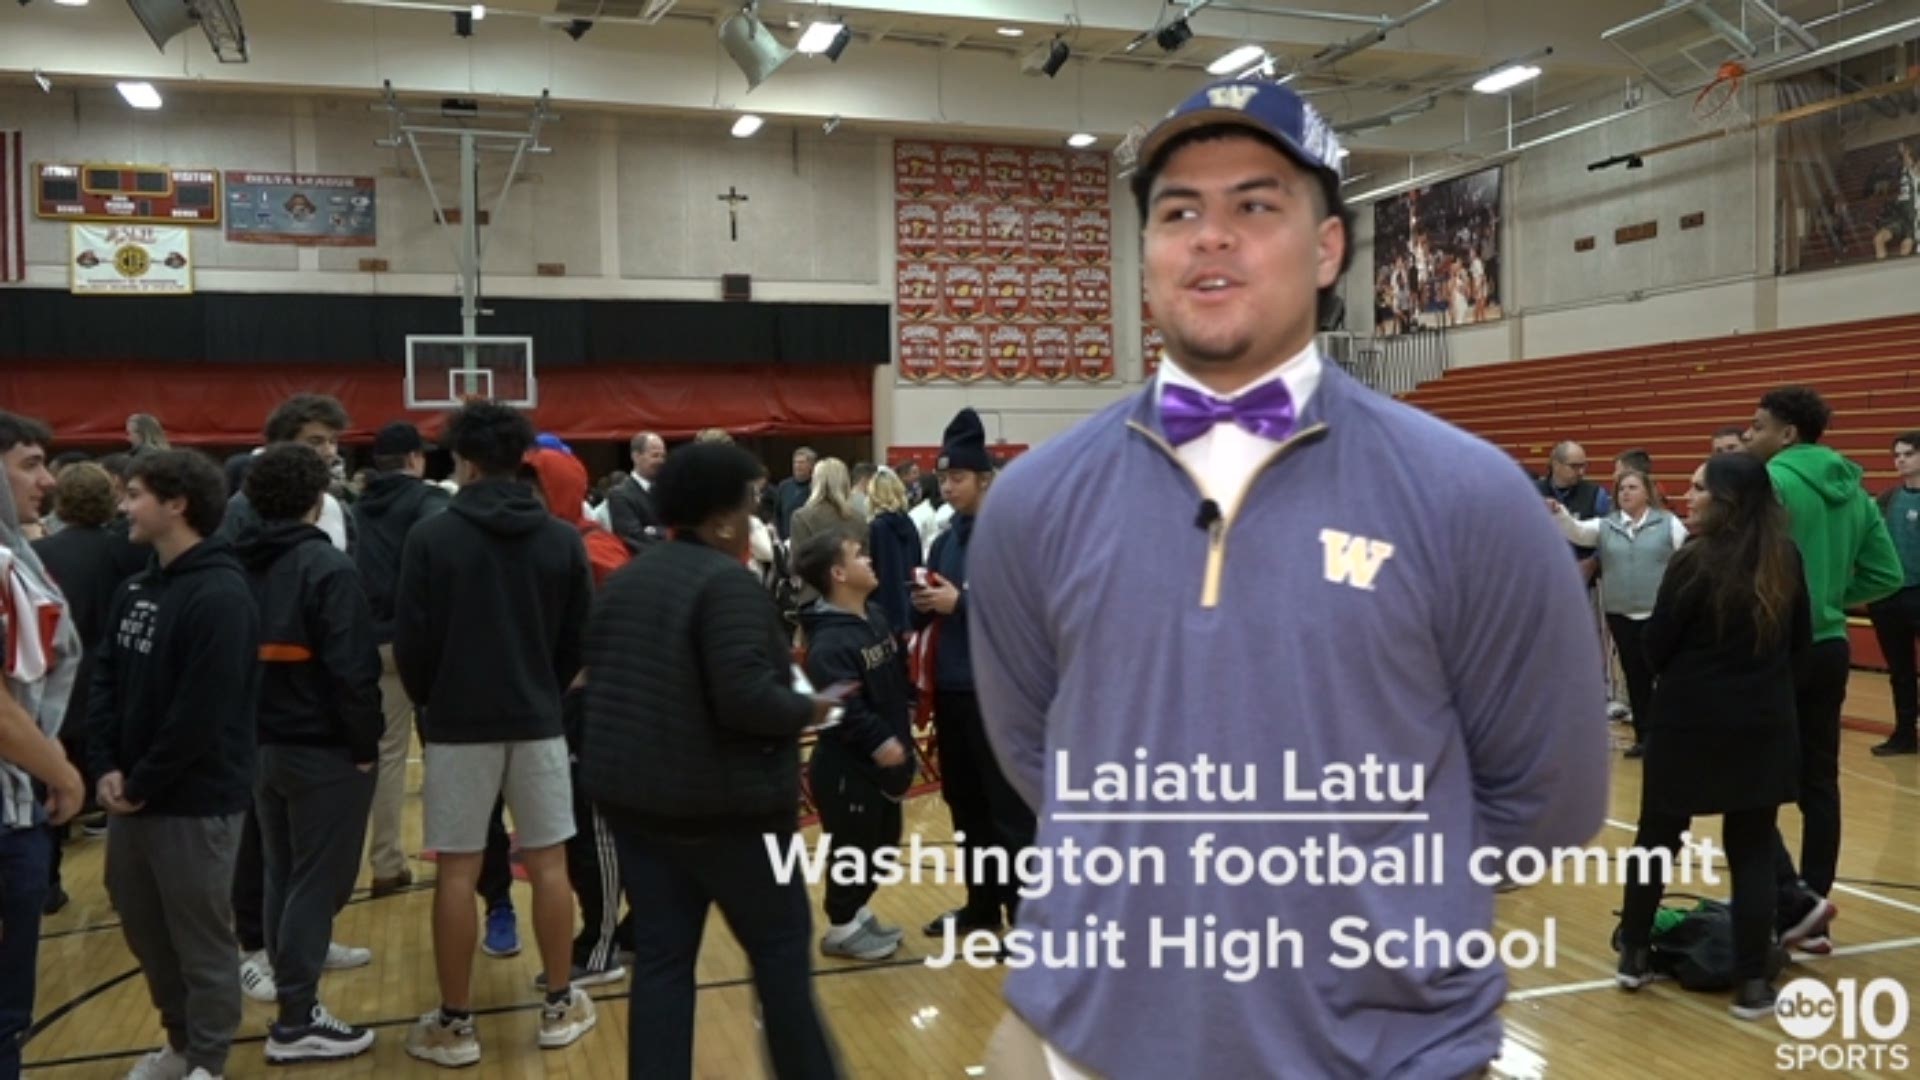 From Sacramento to Seattle: Jesuit football star Laiatu Latu discusses his decision to join the Washington Huskies on National Signing Day